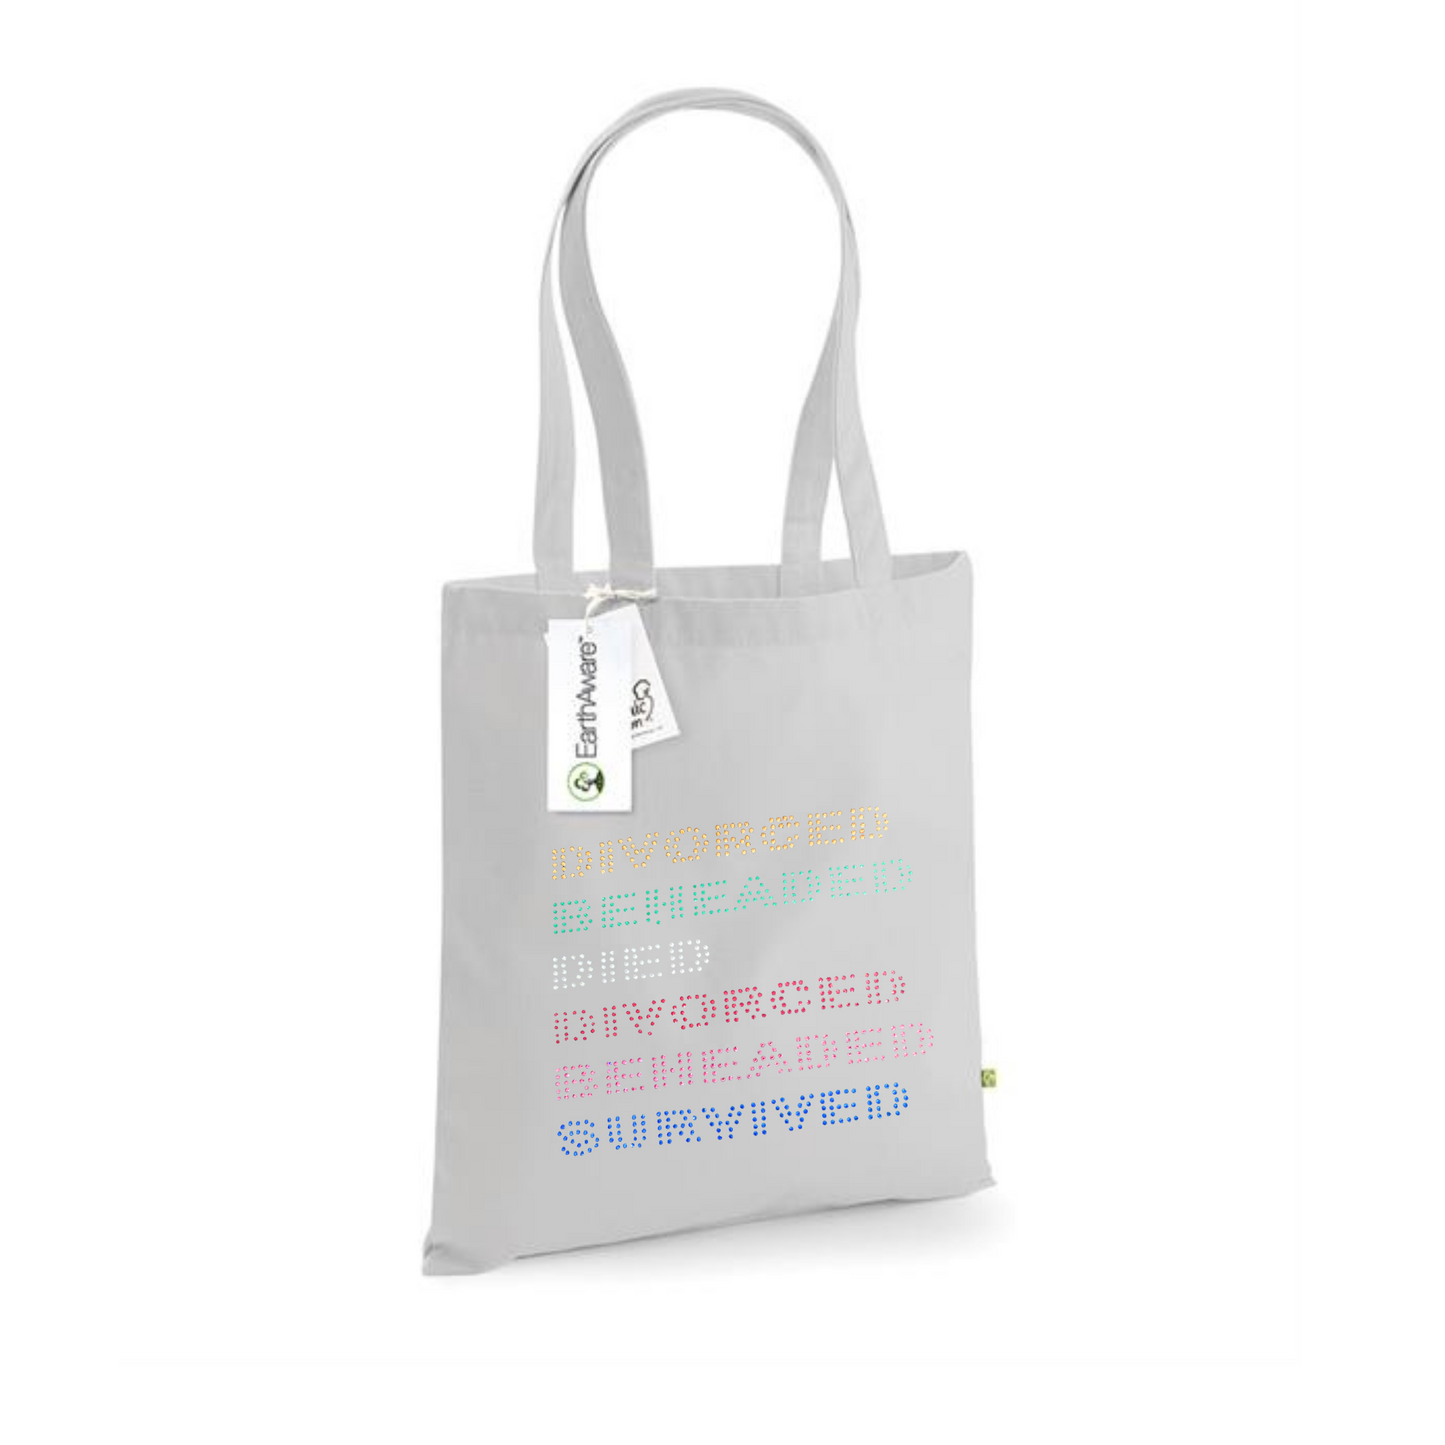 Six Divorced Beheaded Survived Tote Bag